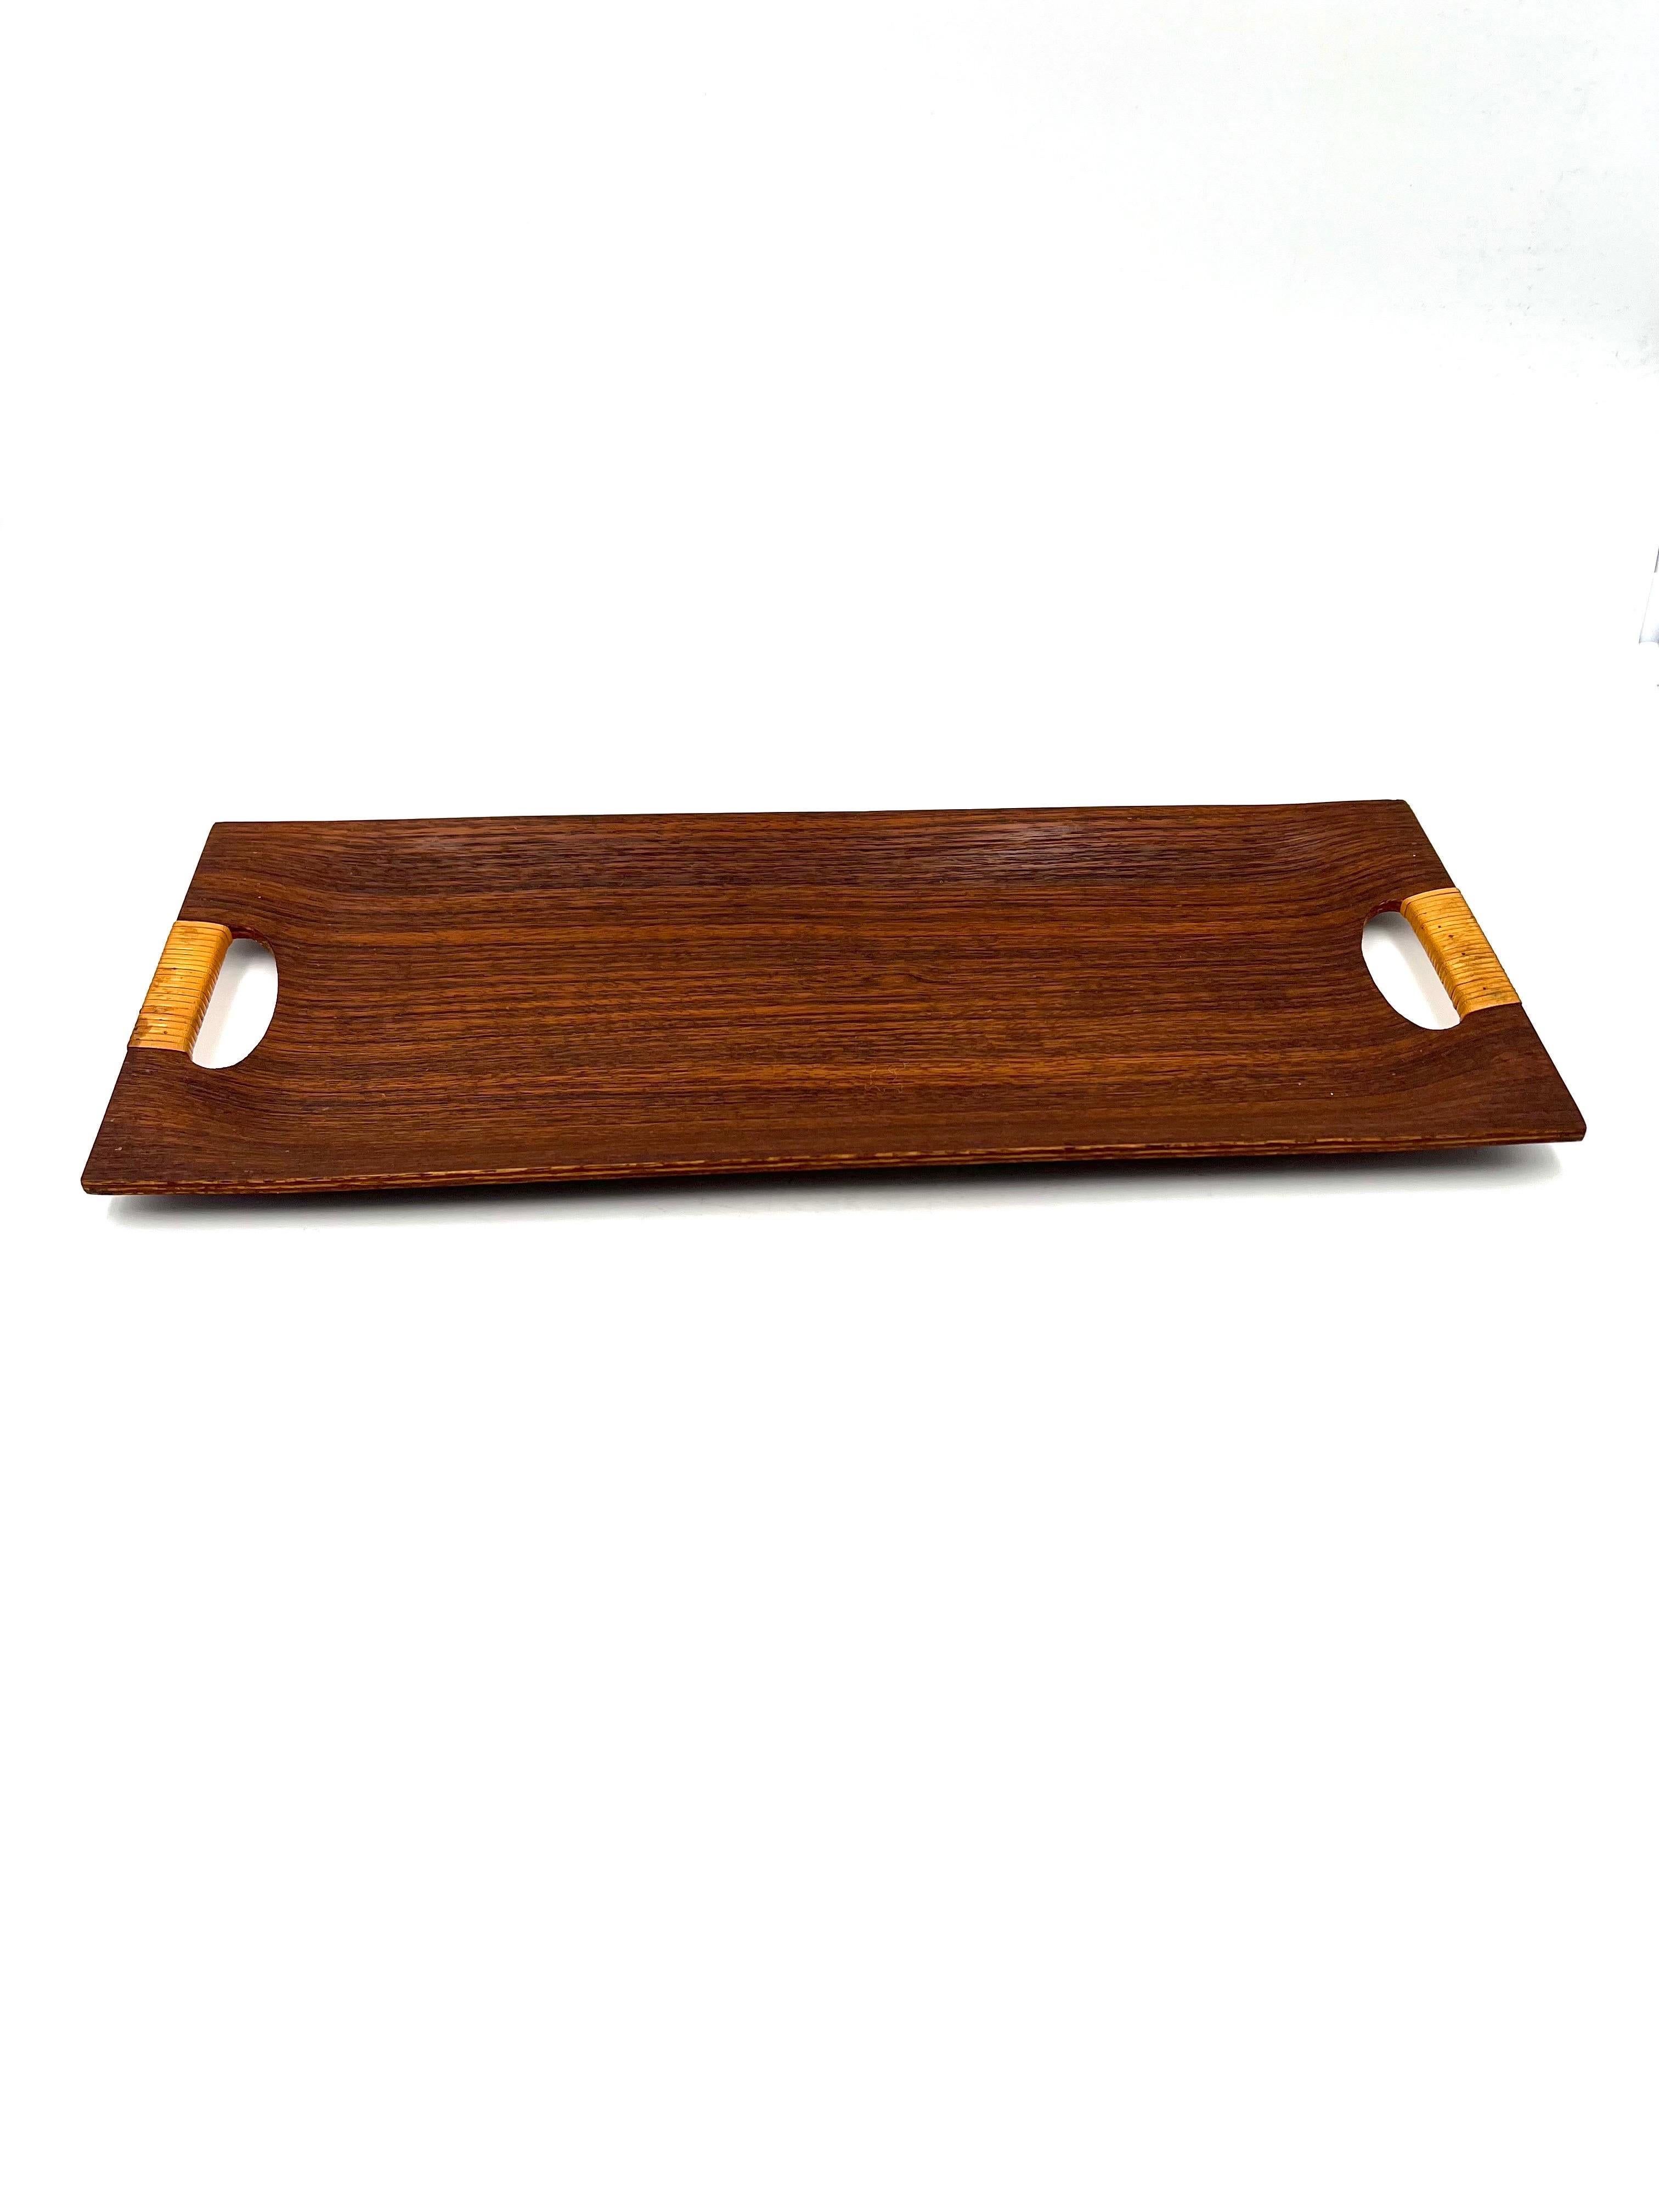 Danish Modern Teak & Cane Molded Wood Catch It All Tray In Good Condition For Sale In San Diego, CA